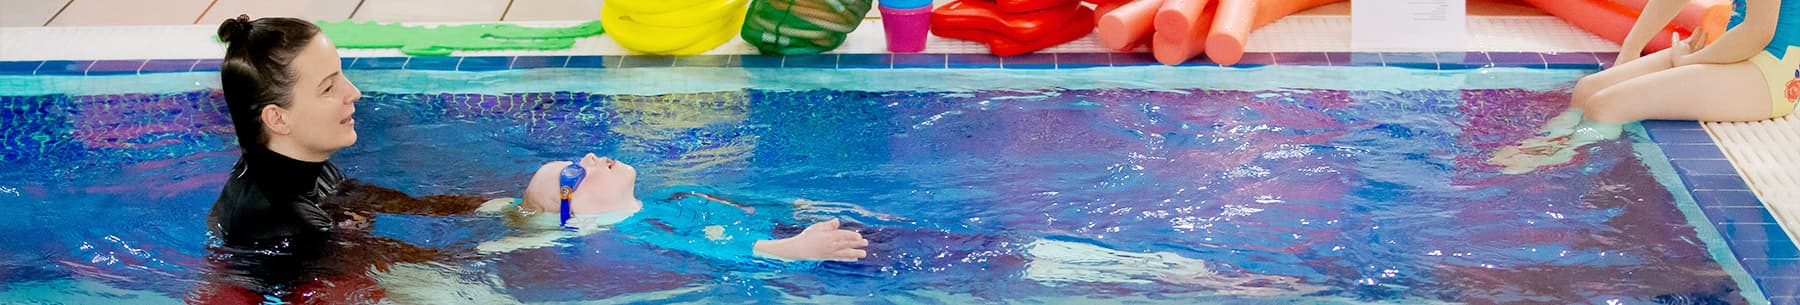 <br /> <b>Notice</b>:  Undefined variable: data1 in <b>/var/www/vhosts/koiswimschool.co.uk/httpdocs/swimming-lessons-toddlers.php</b> on line <b>41</b><br /> <br /> <b>Notice</b>:  Trying to access array offset on value of type null in <b>/var/www/vhosts/koiswimschool.co.uk/httpdocs/swimming-lessons-toddlers.php</b> on line <b>41</b><br /> 